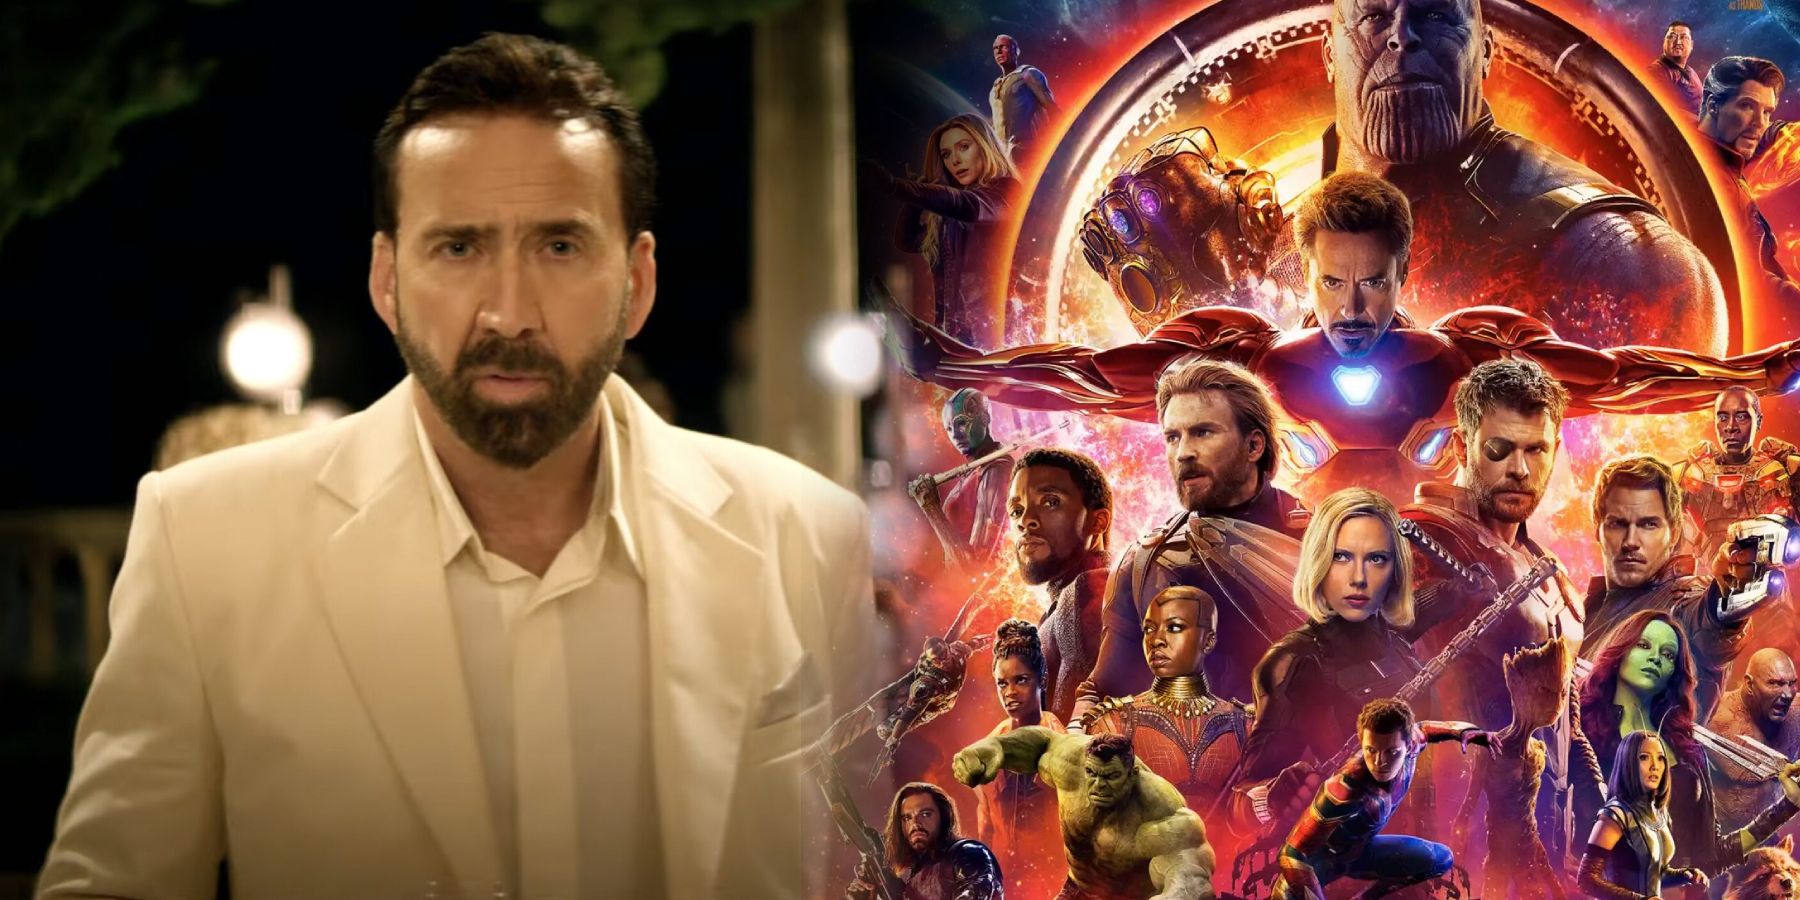 Nicolas Cage Reveals How Involved He Wants To Be With The MCU